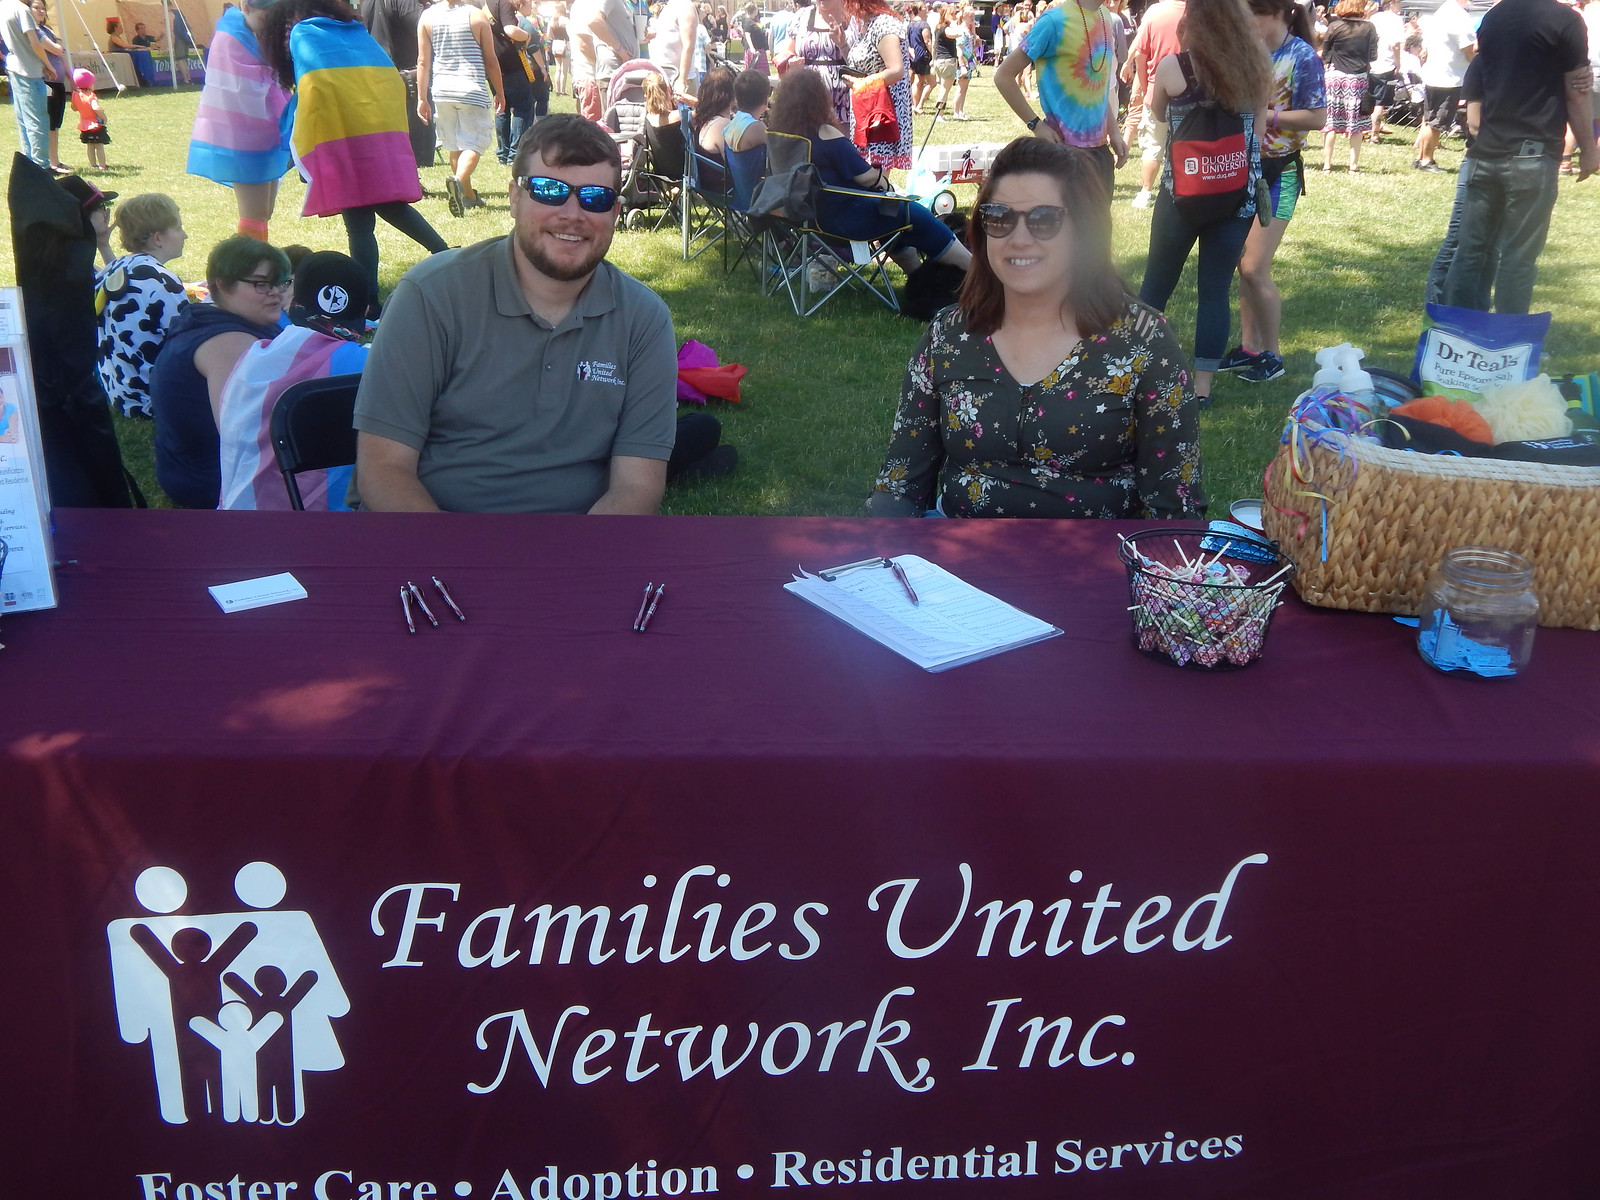 Families United Network table at Pride Fest